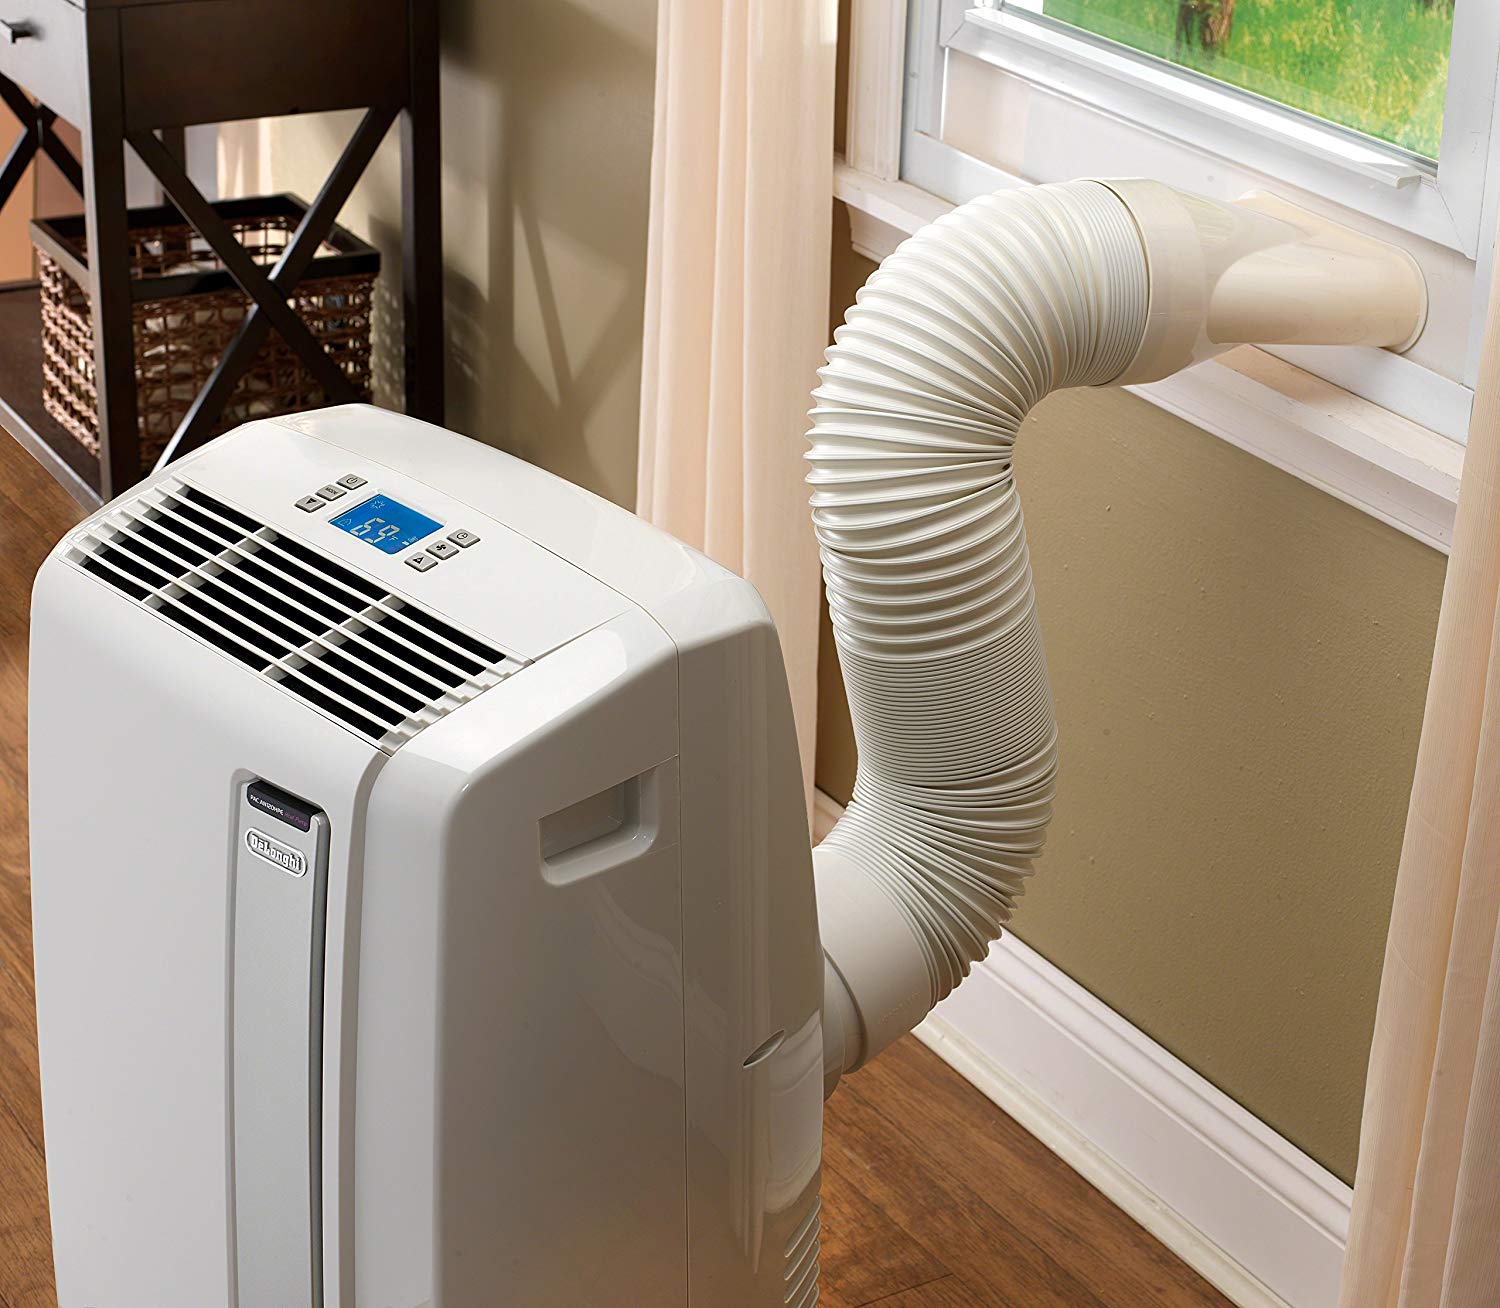 7 Tips To Keep Your Portable Air Conditioner Quiet My Decorative